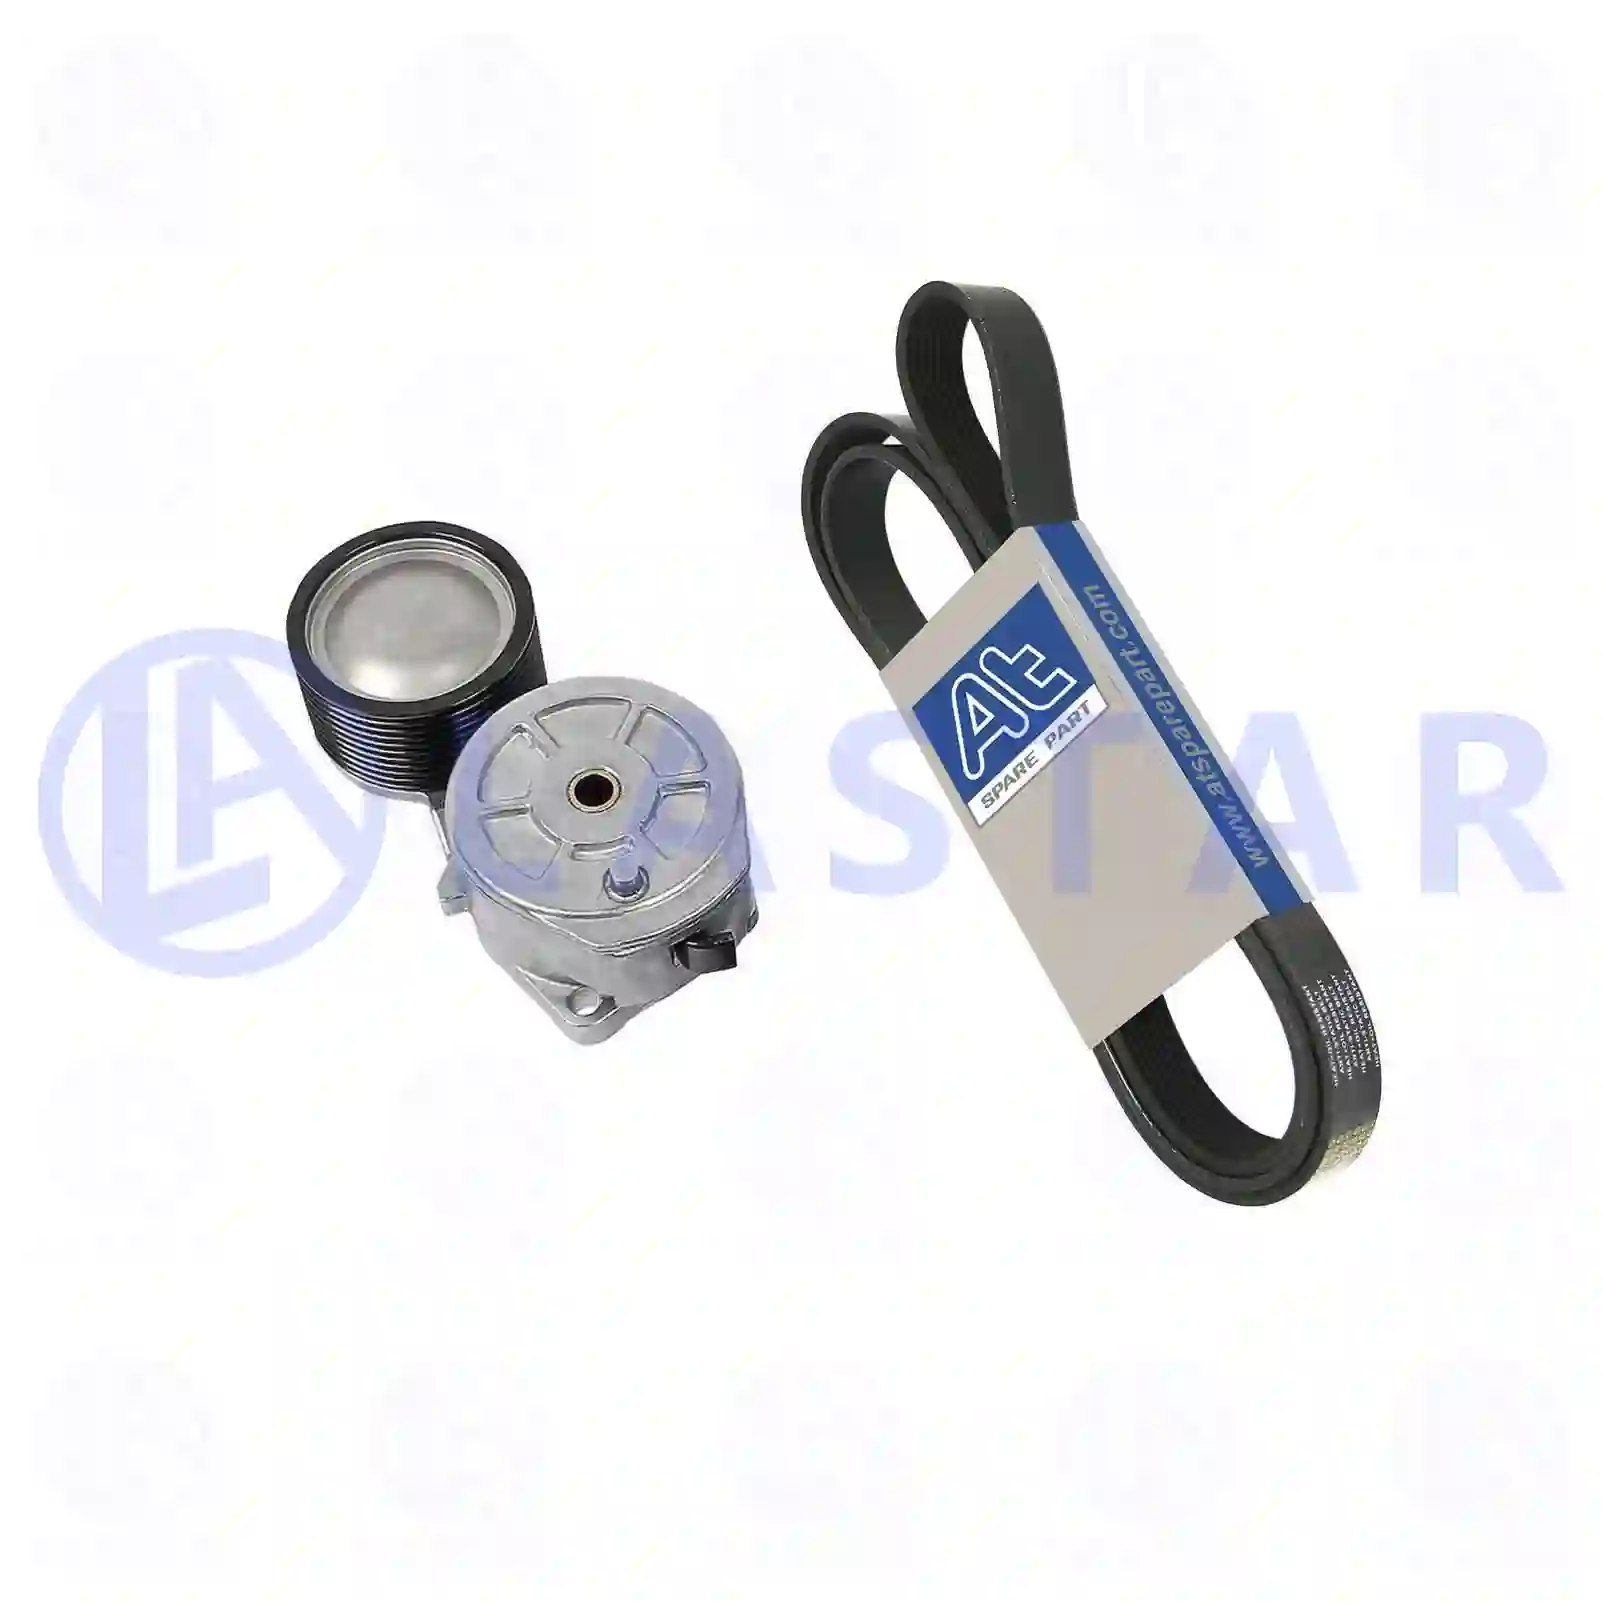 Belt tensioner, complete, with multiribbed belt, 77709960, 1779750S, 1870551S, 2191989S ||  77709960 Lastar Spare Part | Truck Spare Parts, Auotomotive Spare Parts Belt tensioner, complete, with multiribbed belt, 77709960, 1779750S, 1870551S, 2191989S ||  77709960 Lastar Spare Part | Truck Spare Parts, Auotomotive Spare Parts